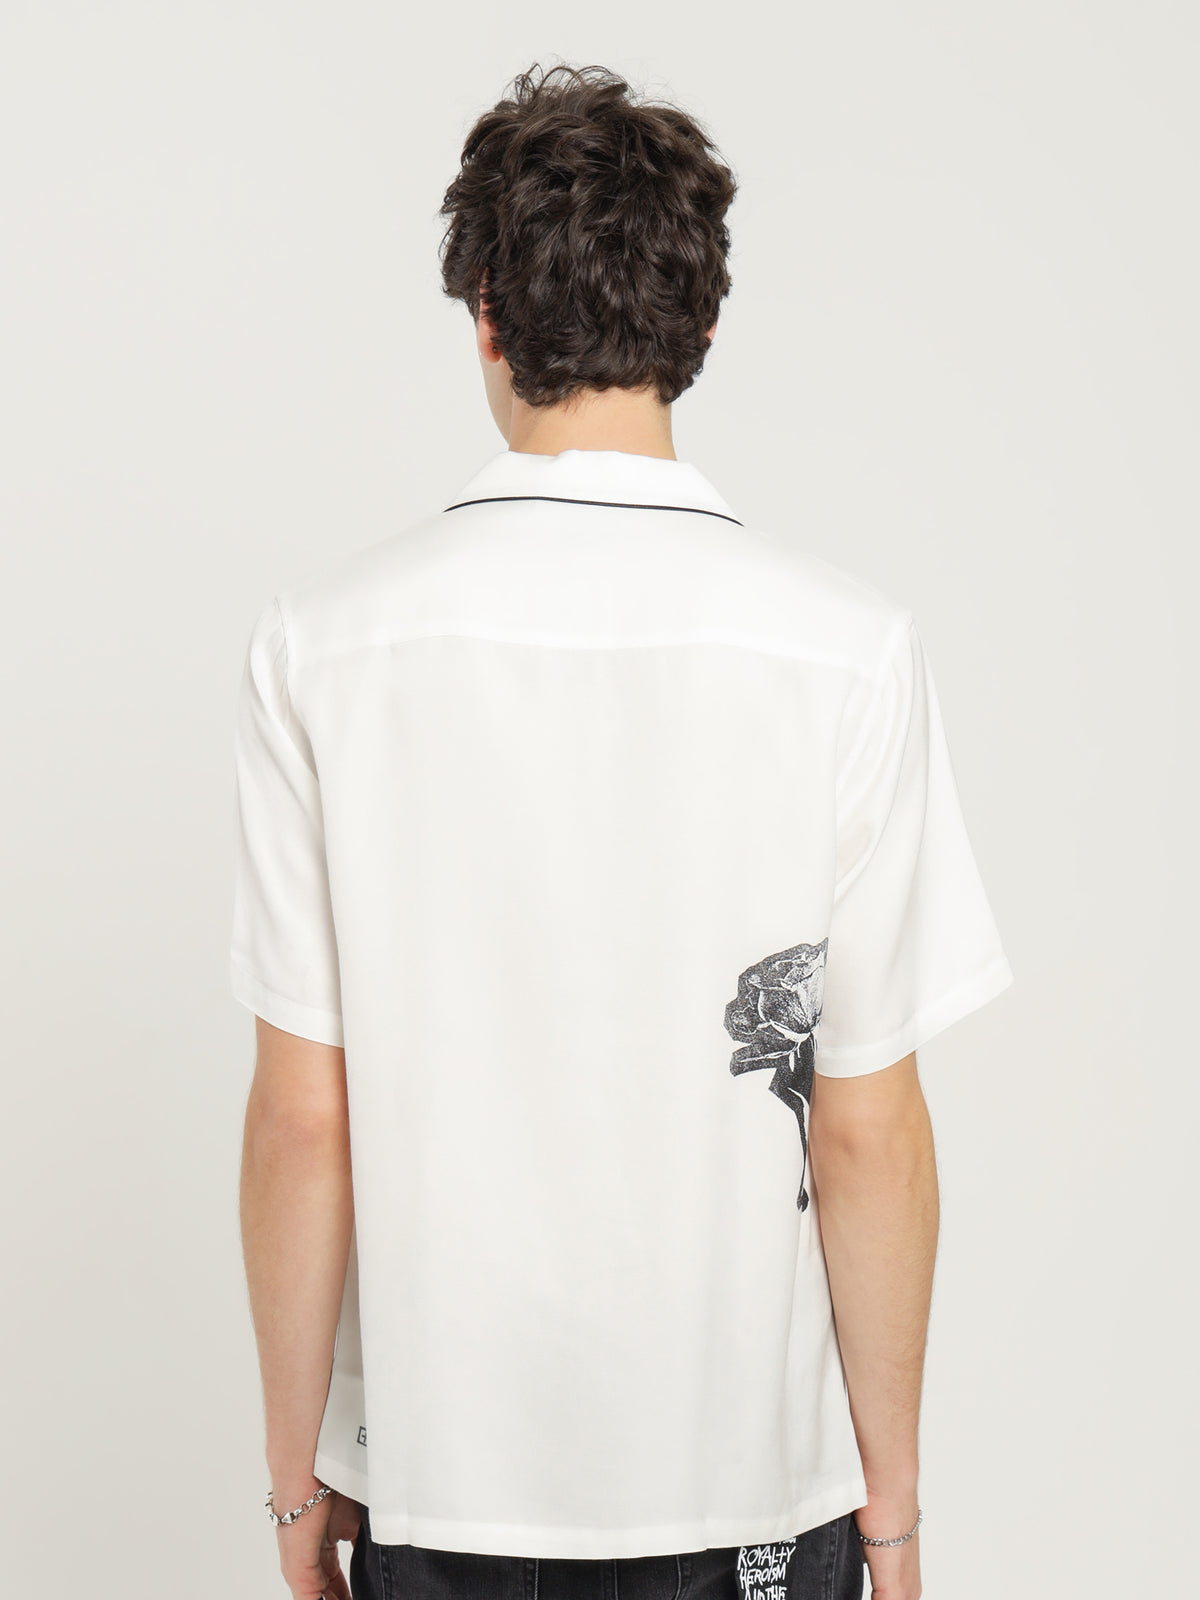 Kut Out Resort Shirt in White